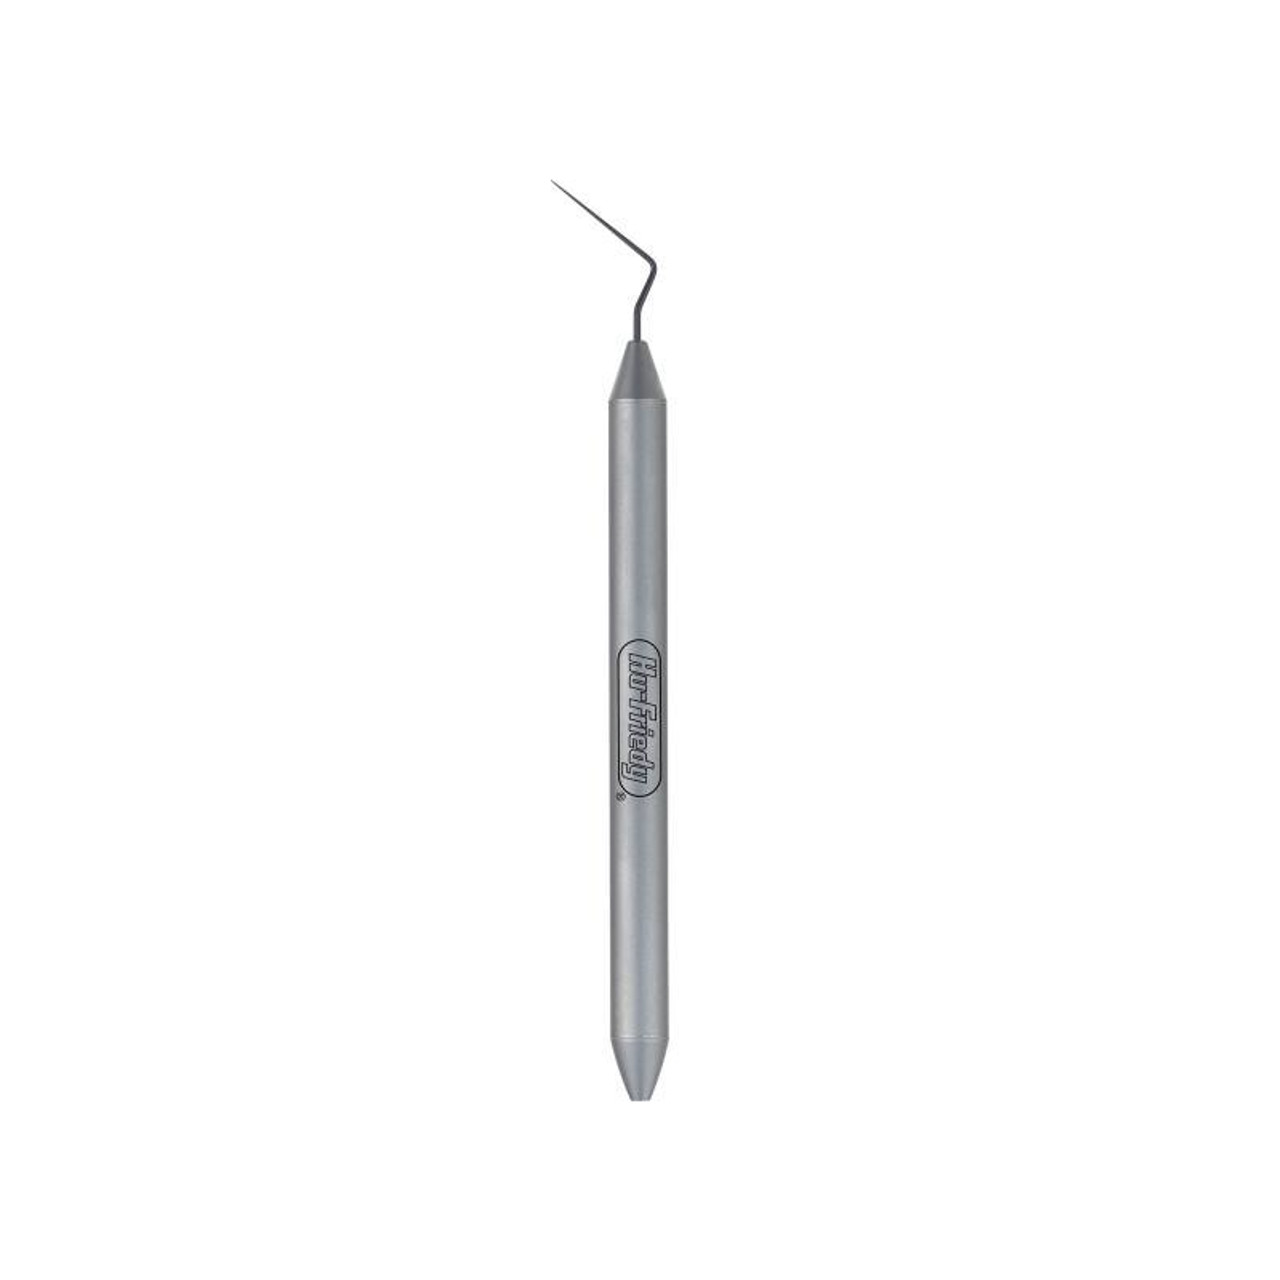 D11T Root Canal Spreader #30 Round, Hu-Friedy, RCSD11T